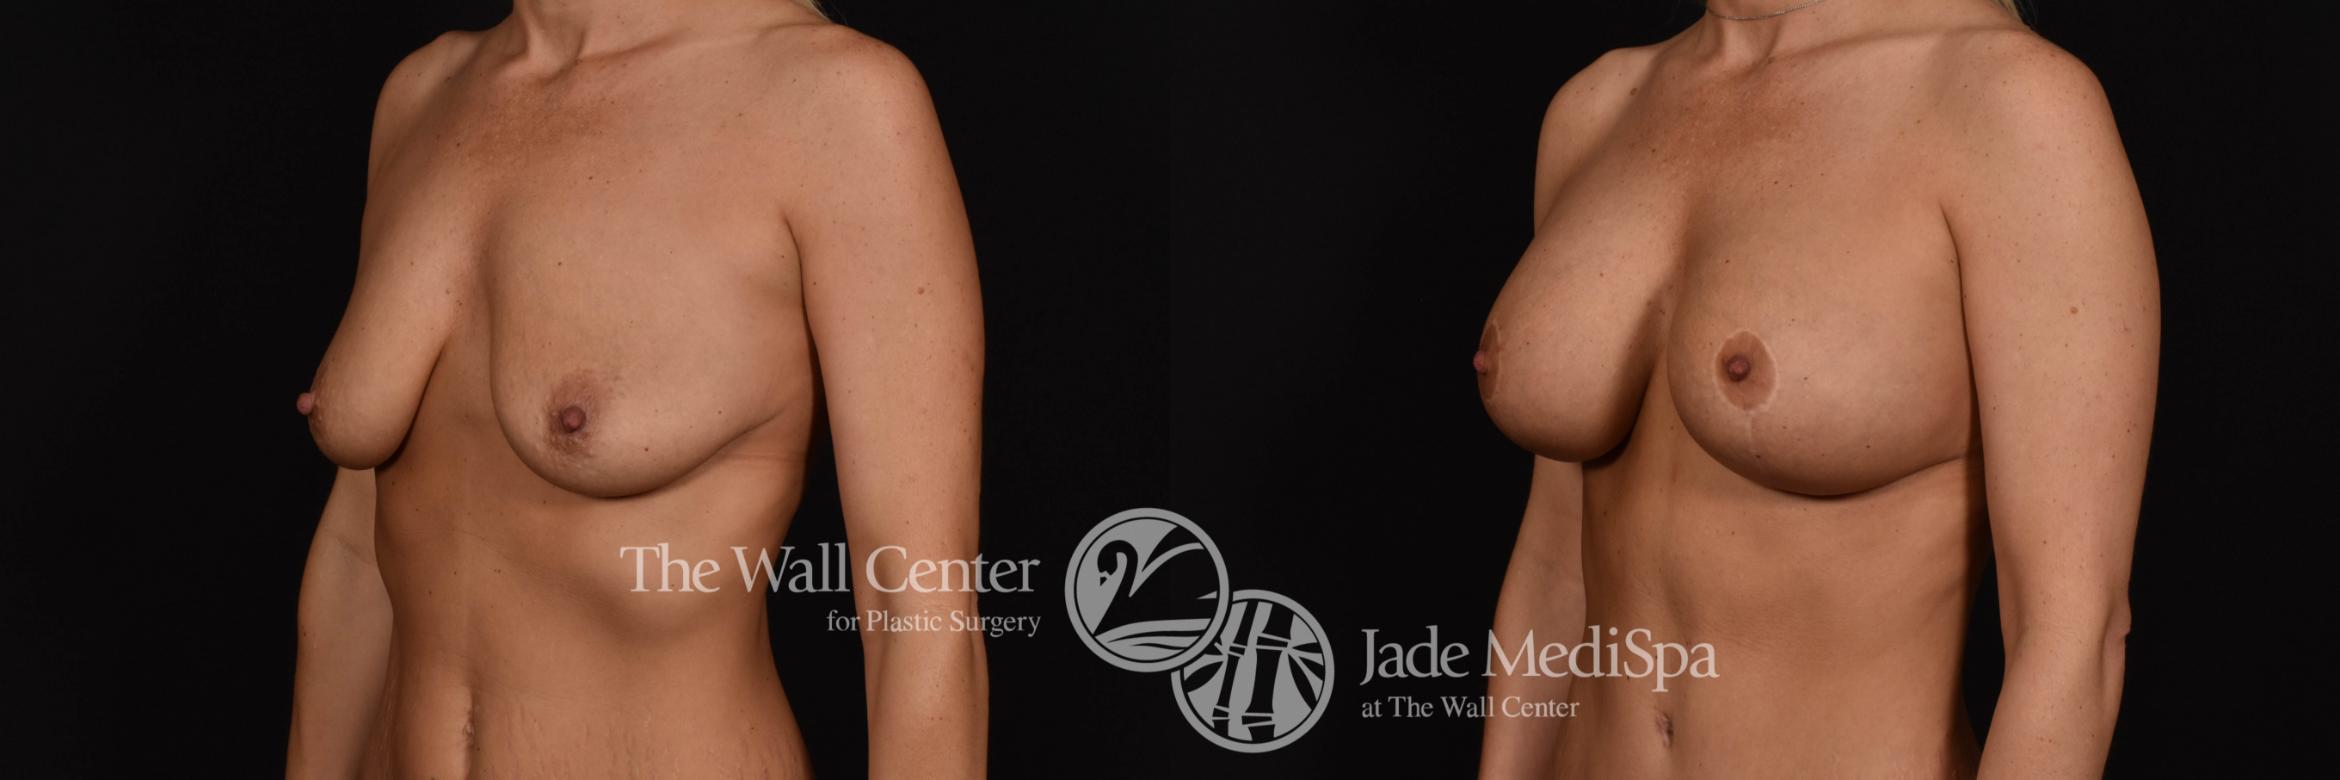 Breast Aug with Lift Left Oblique Photo, Shreveport, Louisiana, The Wall Center for Plastic Surgery, Case 926